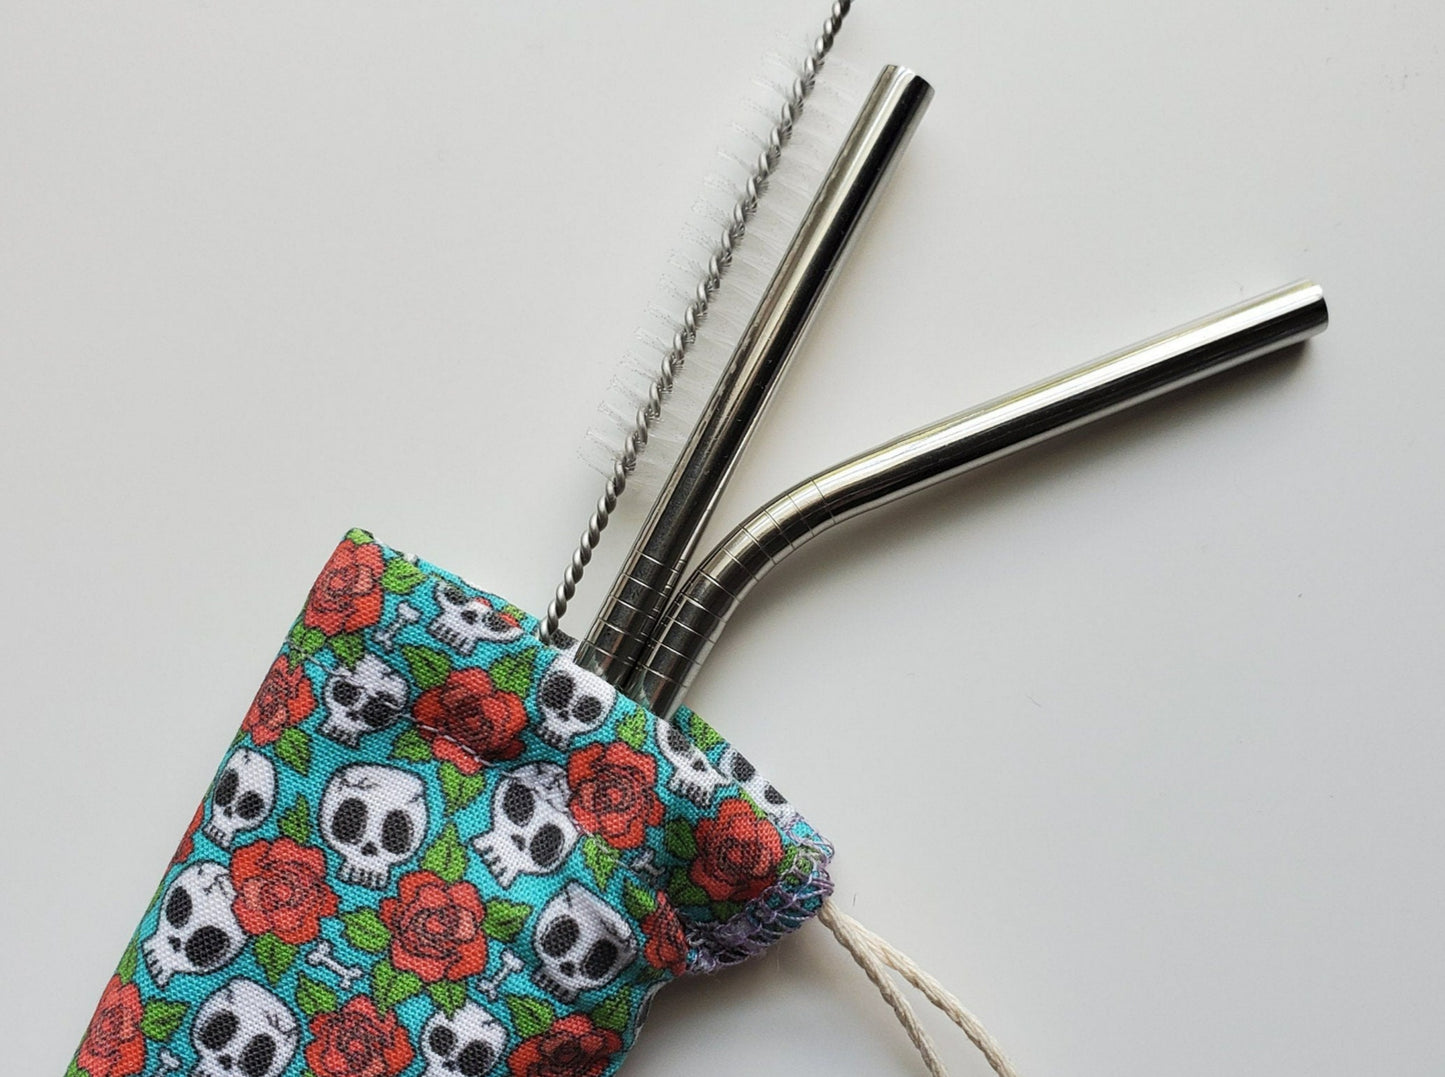 Reusable straw pouch with stainless steel straws sticking out the top. The fabric of the pouch is blue with tiny white skulls and red roses, and it has a drawstring closure.